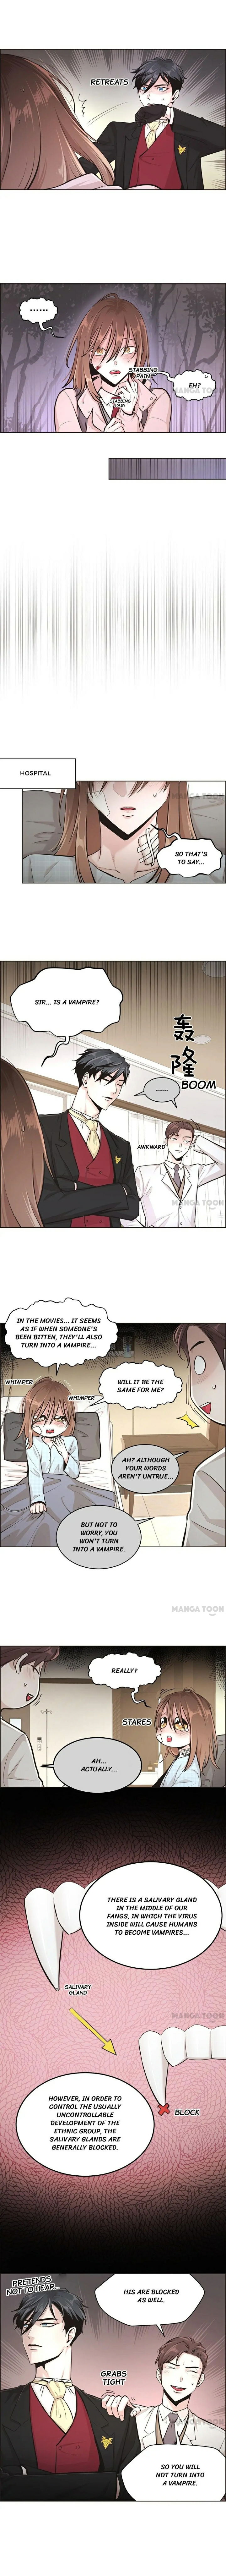 Blood Type Love Chapter 5 page 7